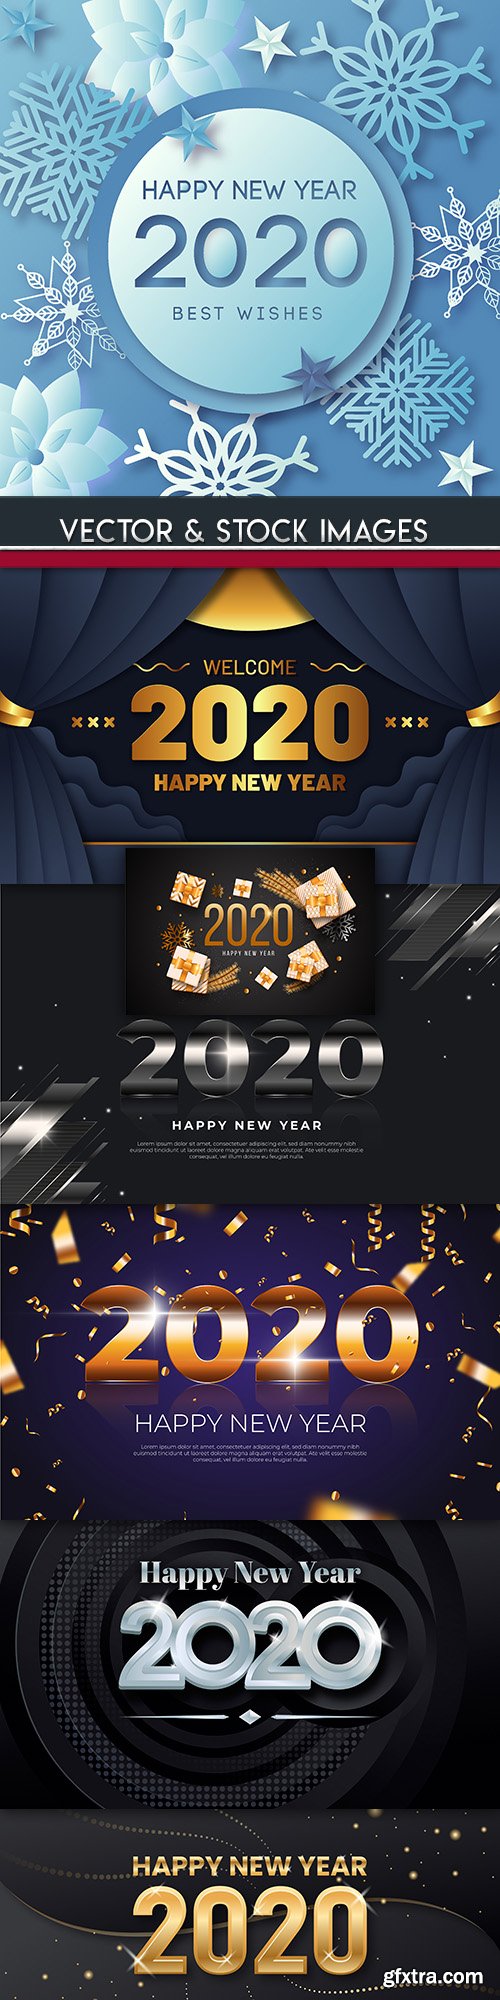 New Year and Christmas decorative 2020 illustration 12 